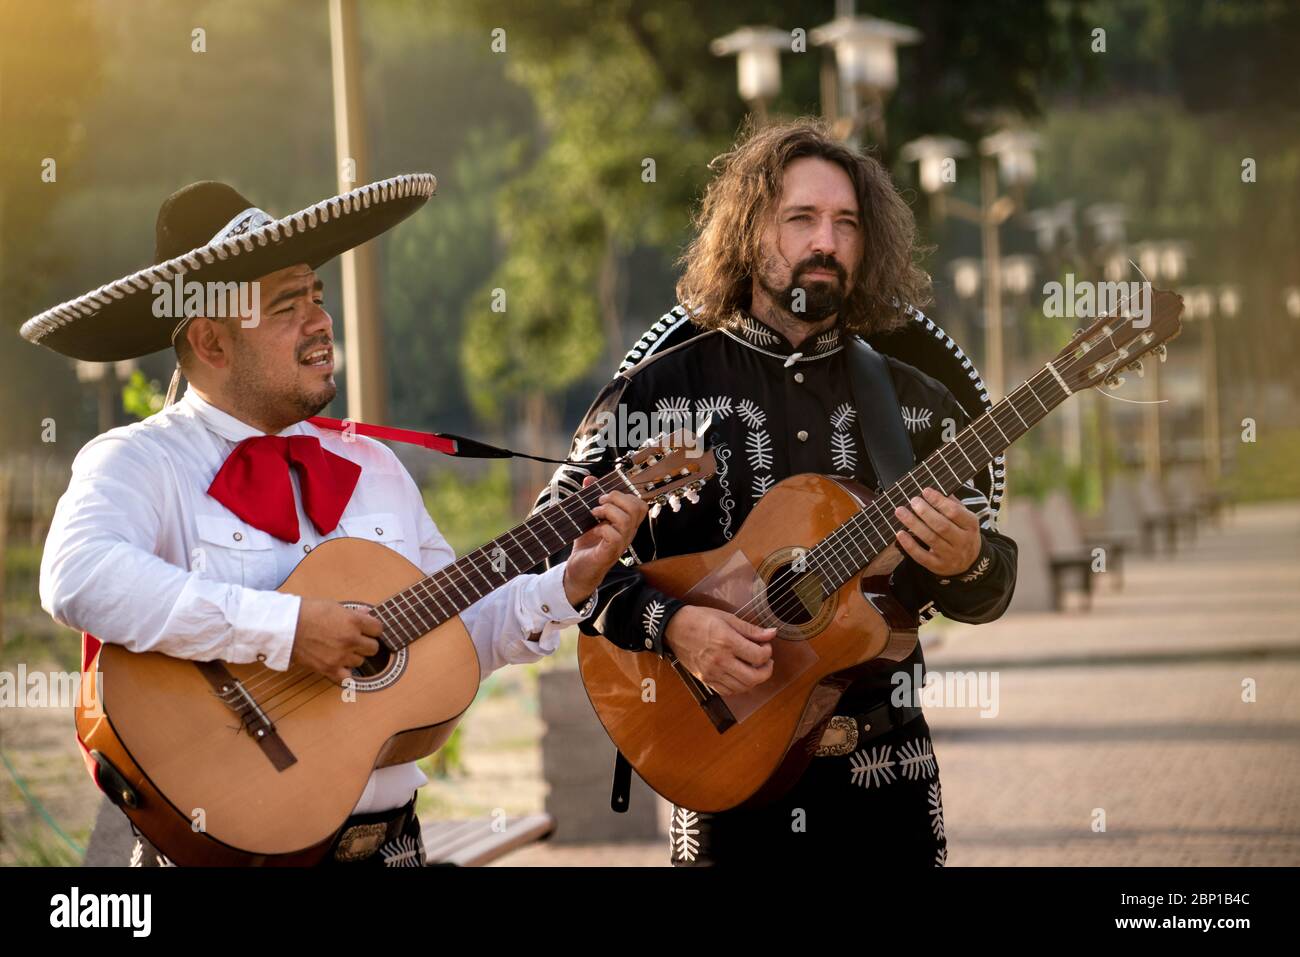 Mexican musicians play musical instruments in the city. City street in the summer. Stock Photo